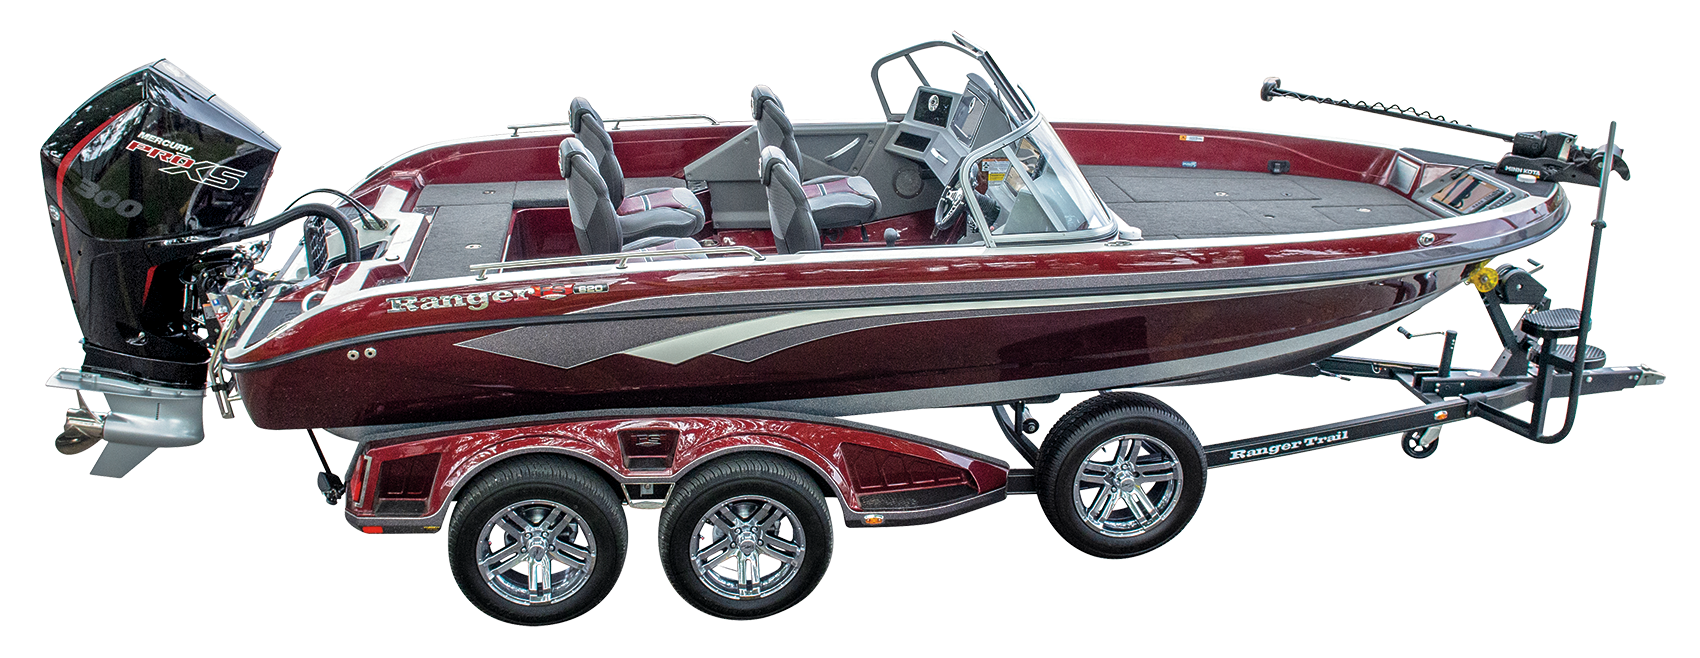 Ranger Boats 620 FS Pro for sale in United States of America - Rightboat